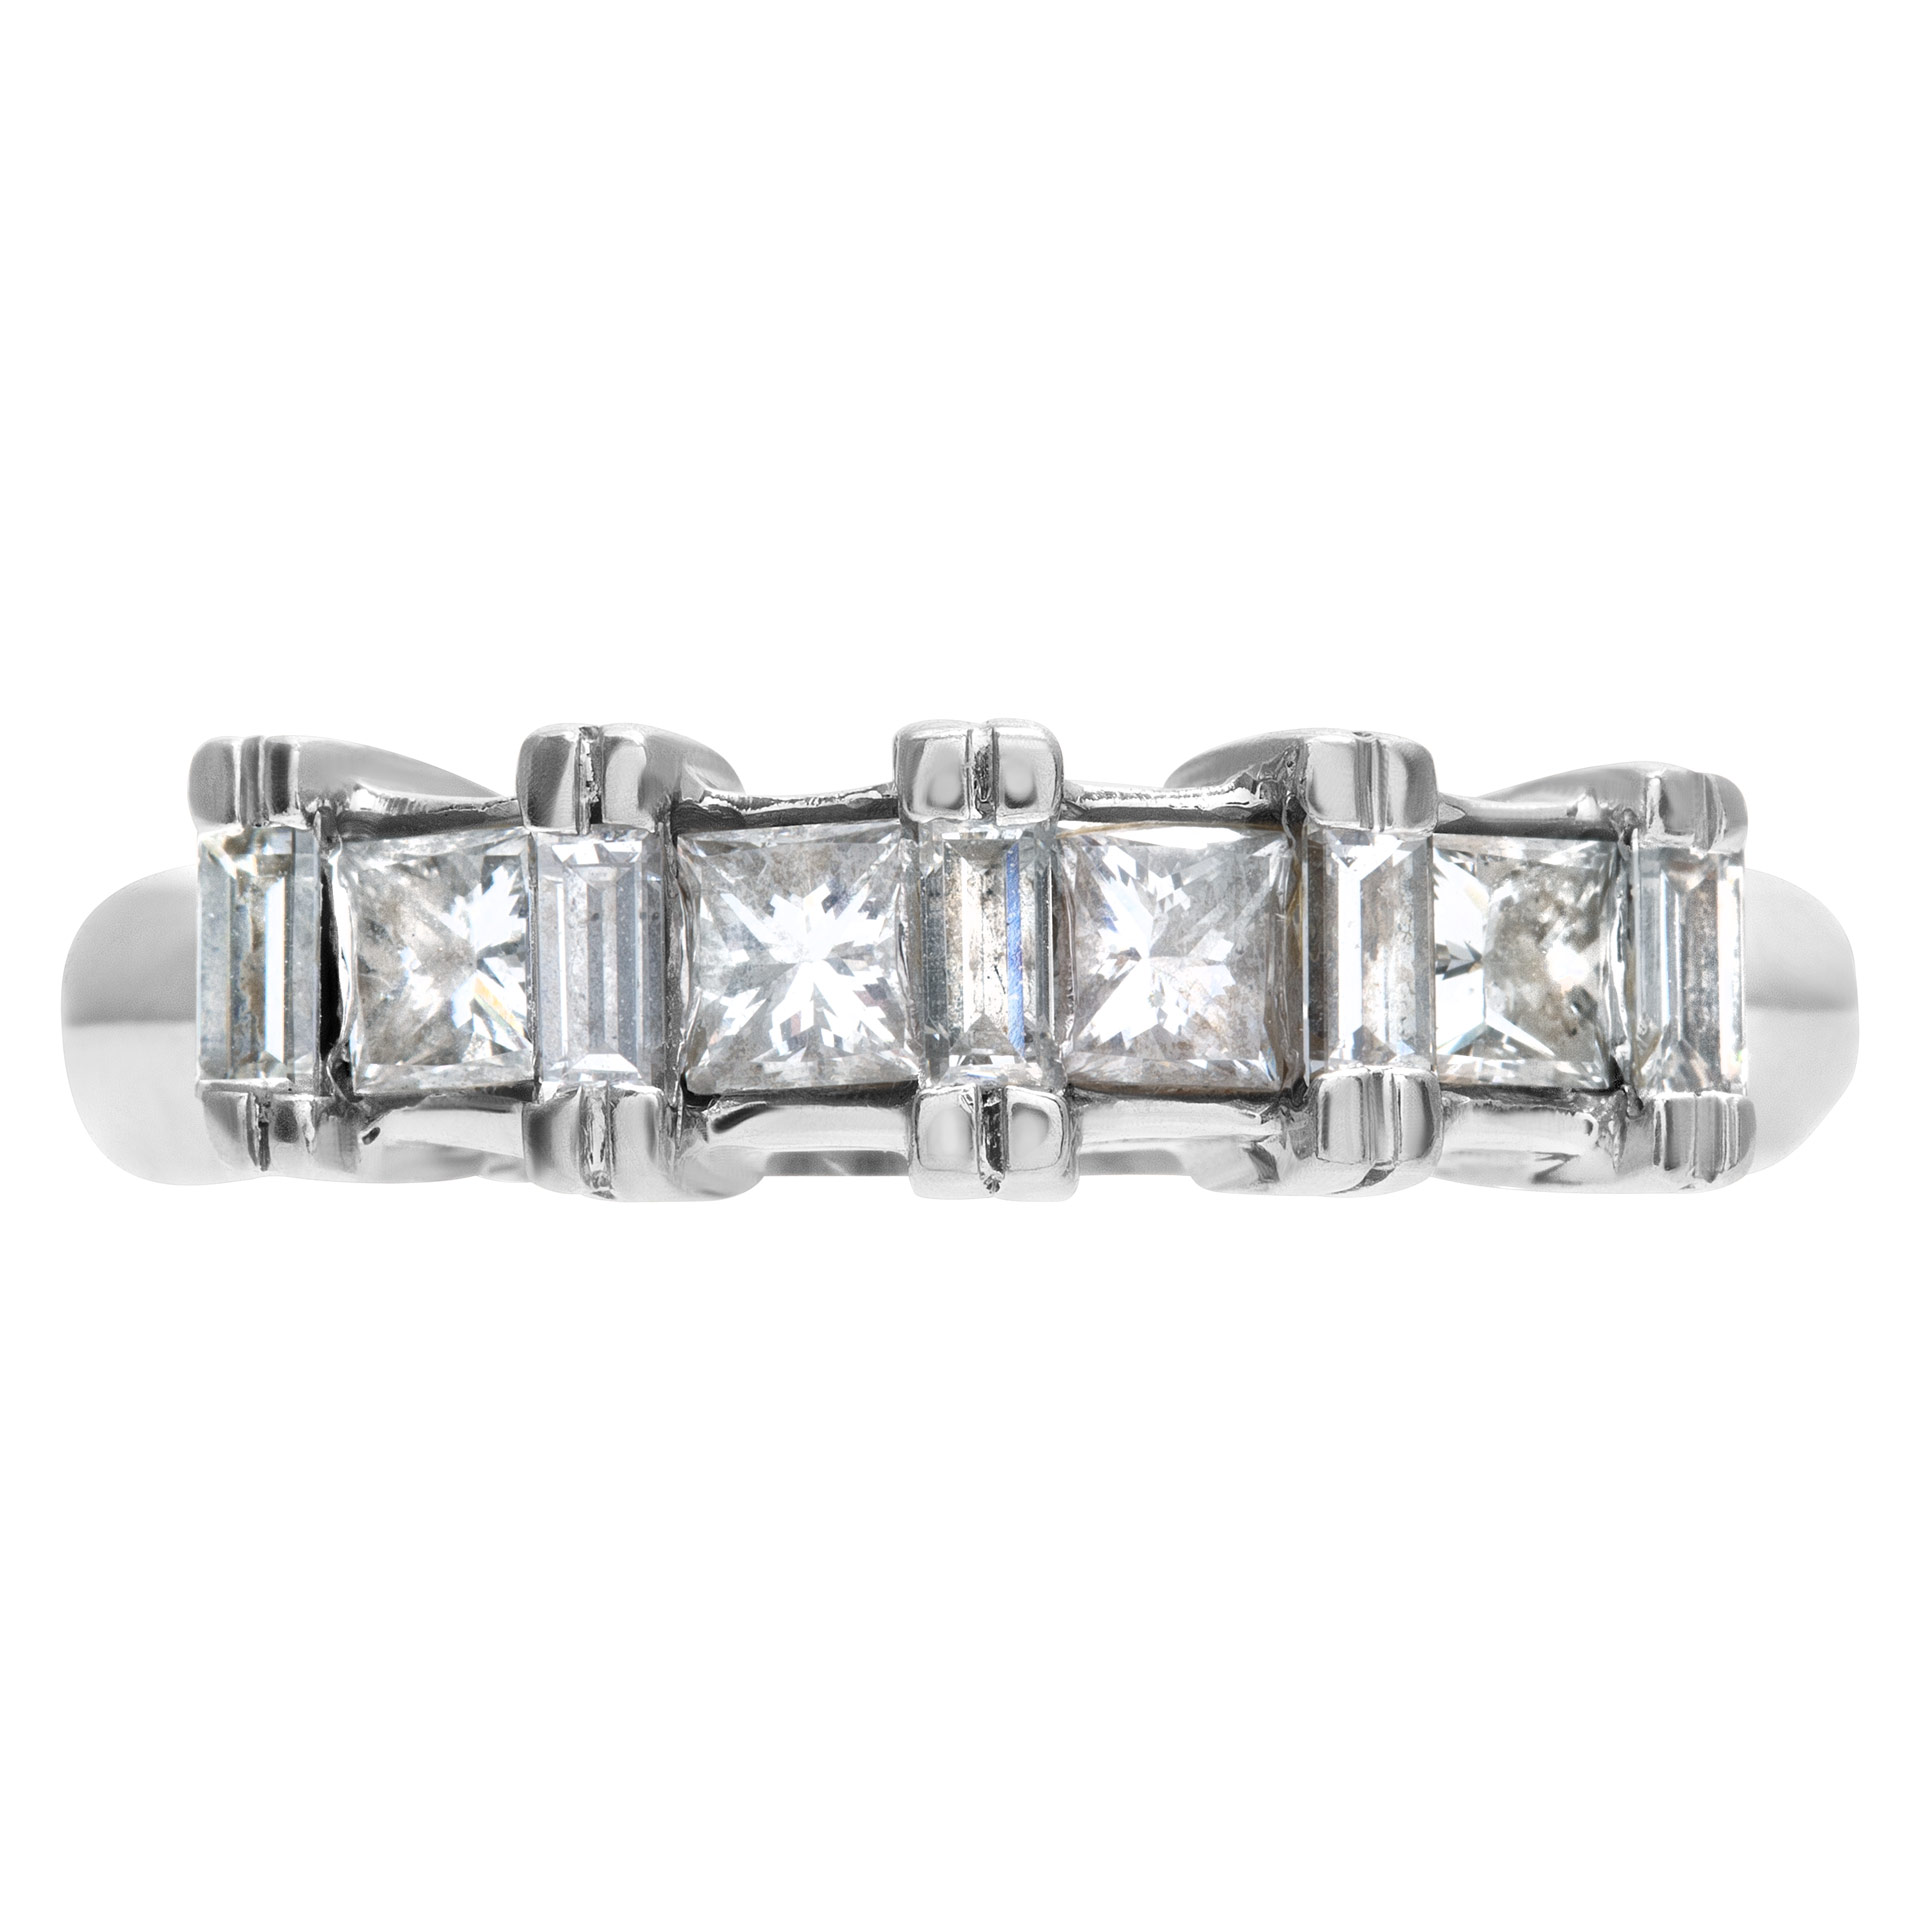 Fancy 14k white gold Ring with 0.85 cts of princess cut diamonds and baguettes. image 1